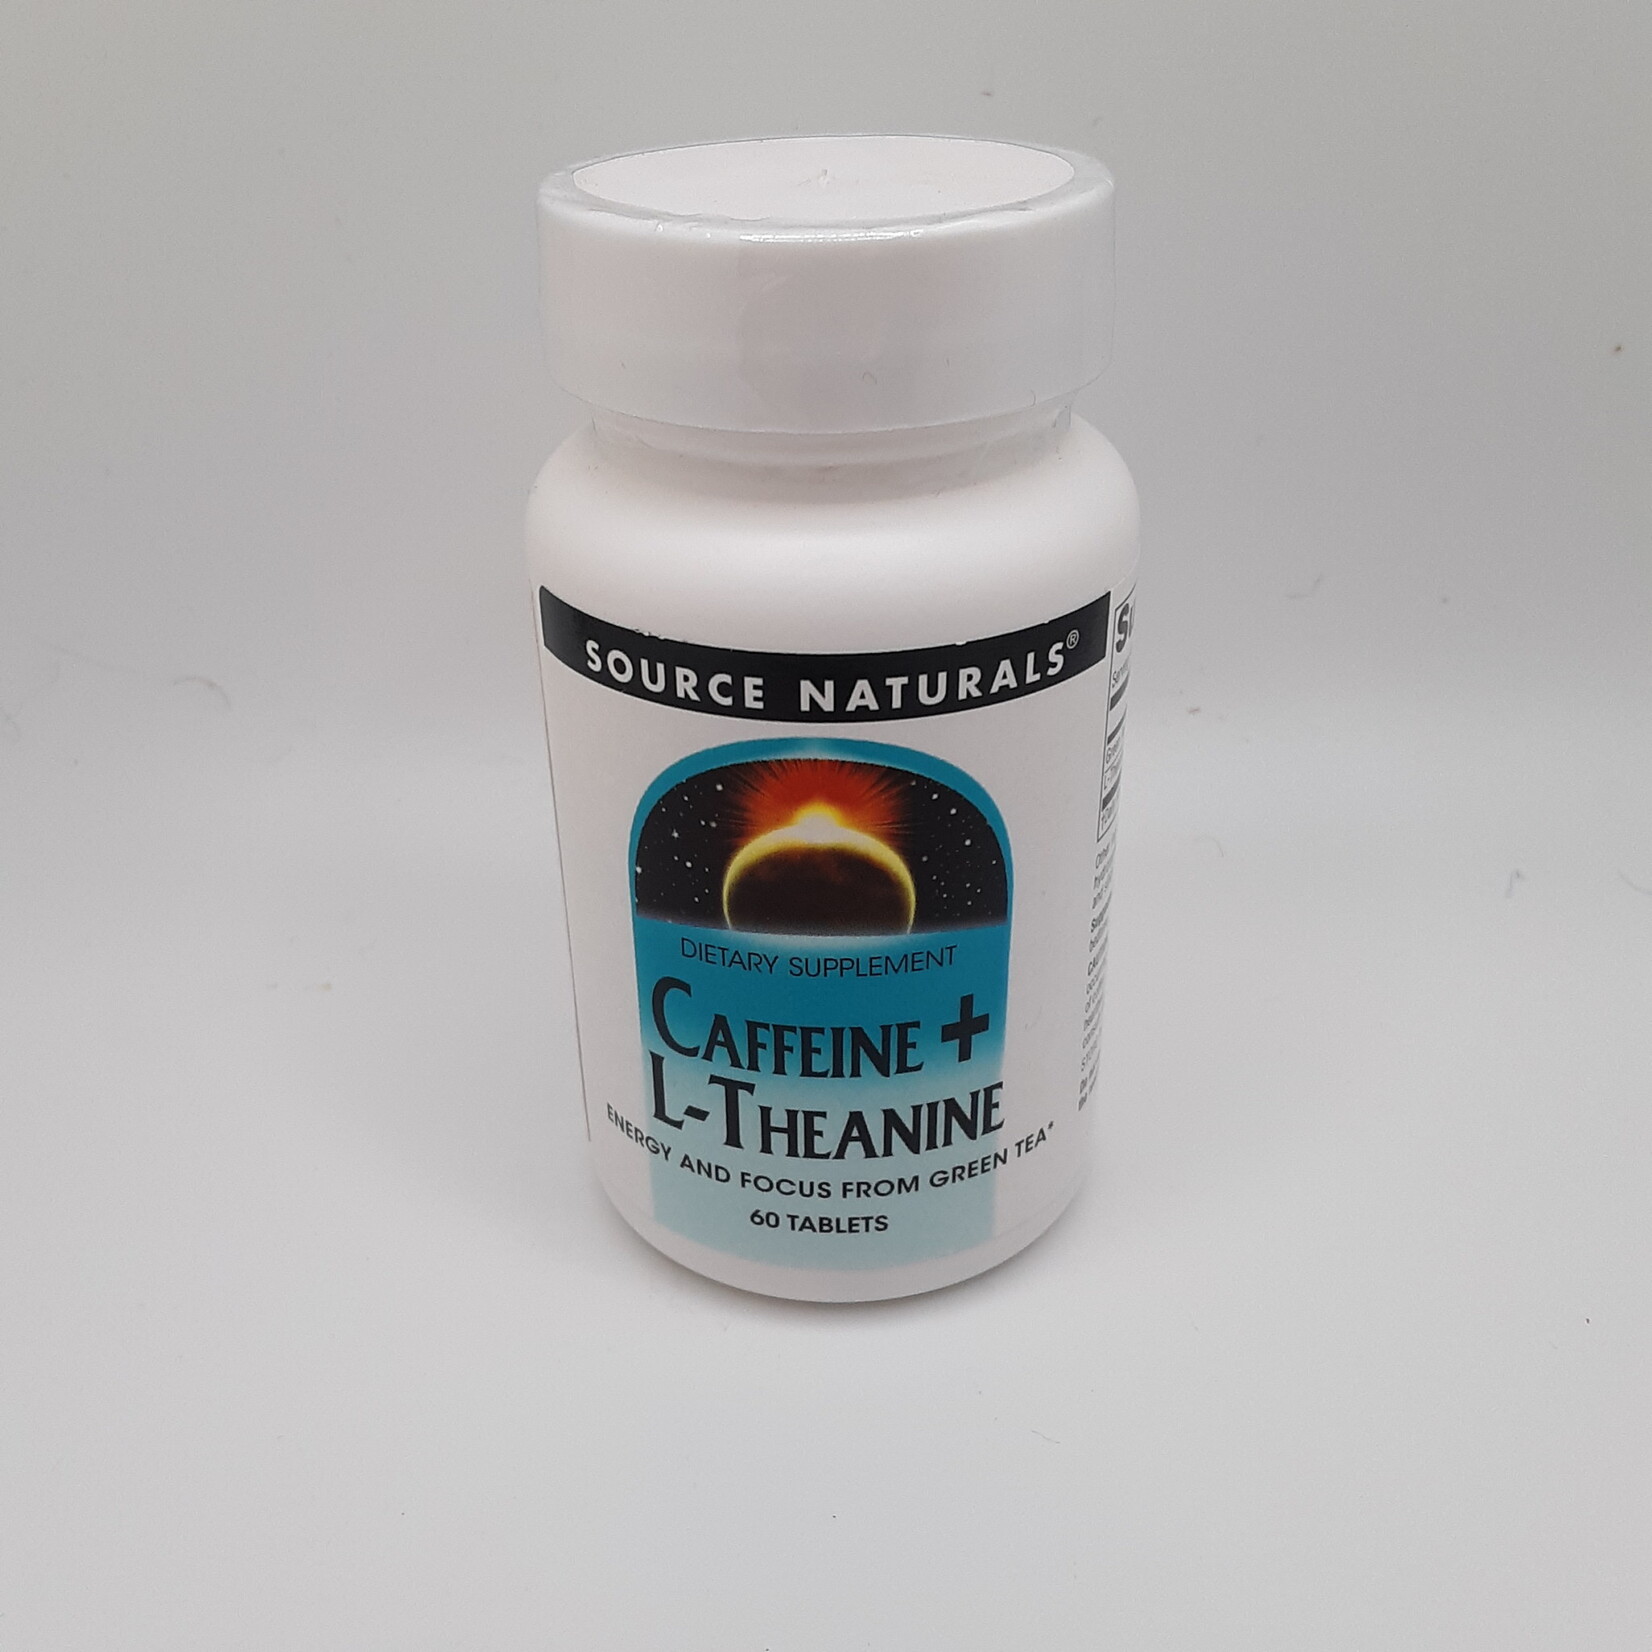 Source Naturals Caffeine + L-Theanine, 60 tablets